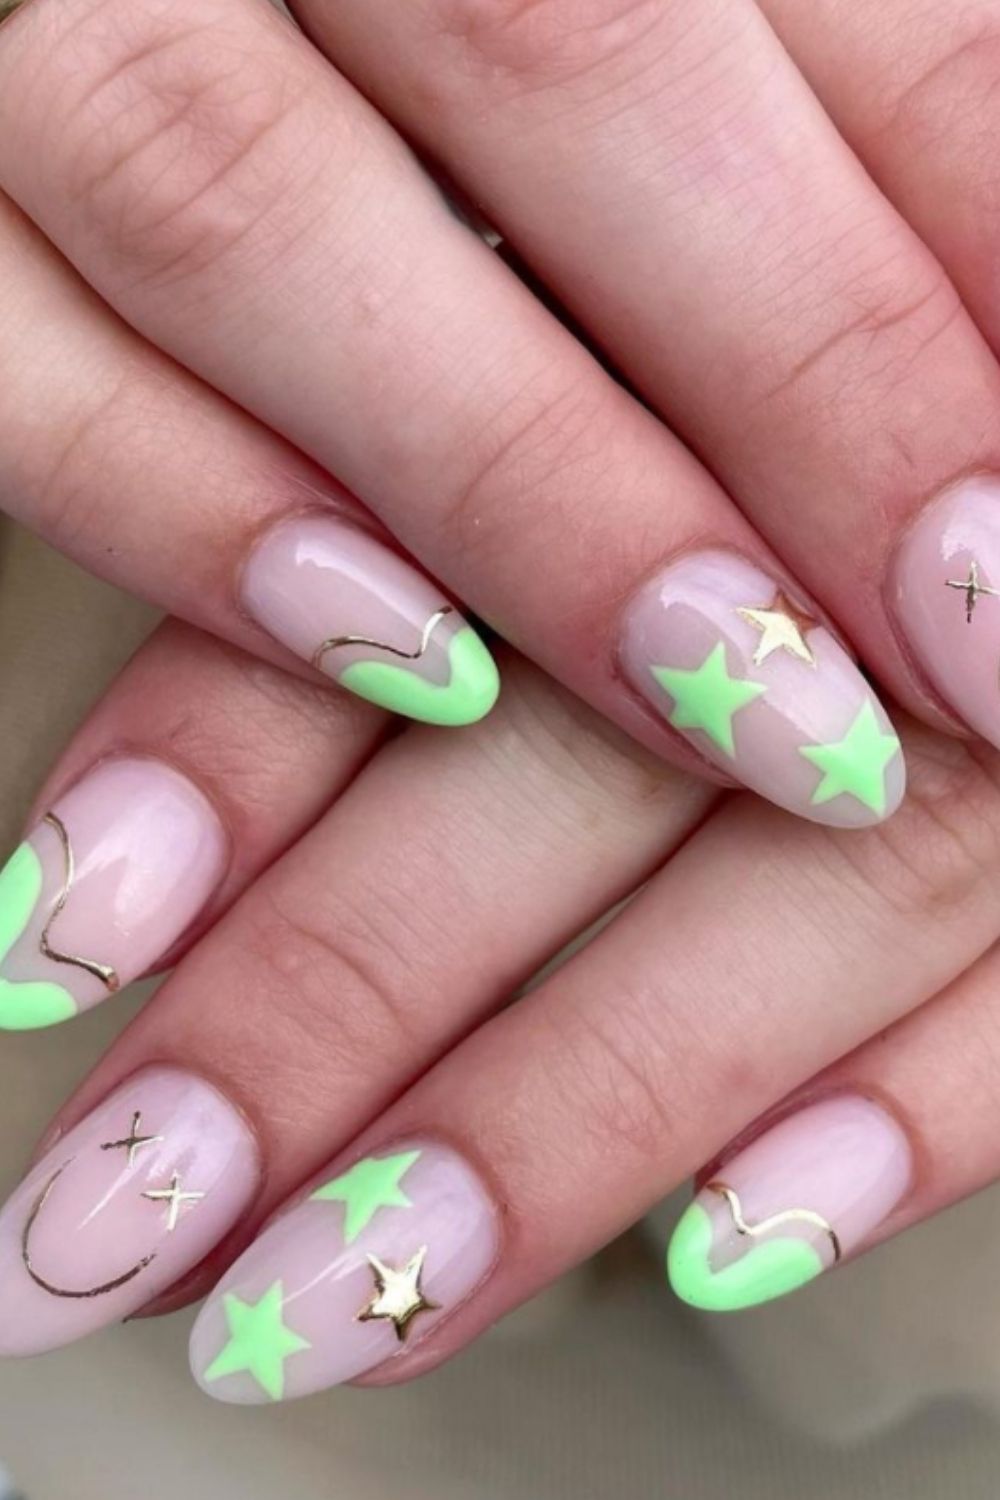 Gold stars and neon almond nails art for summer nails